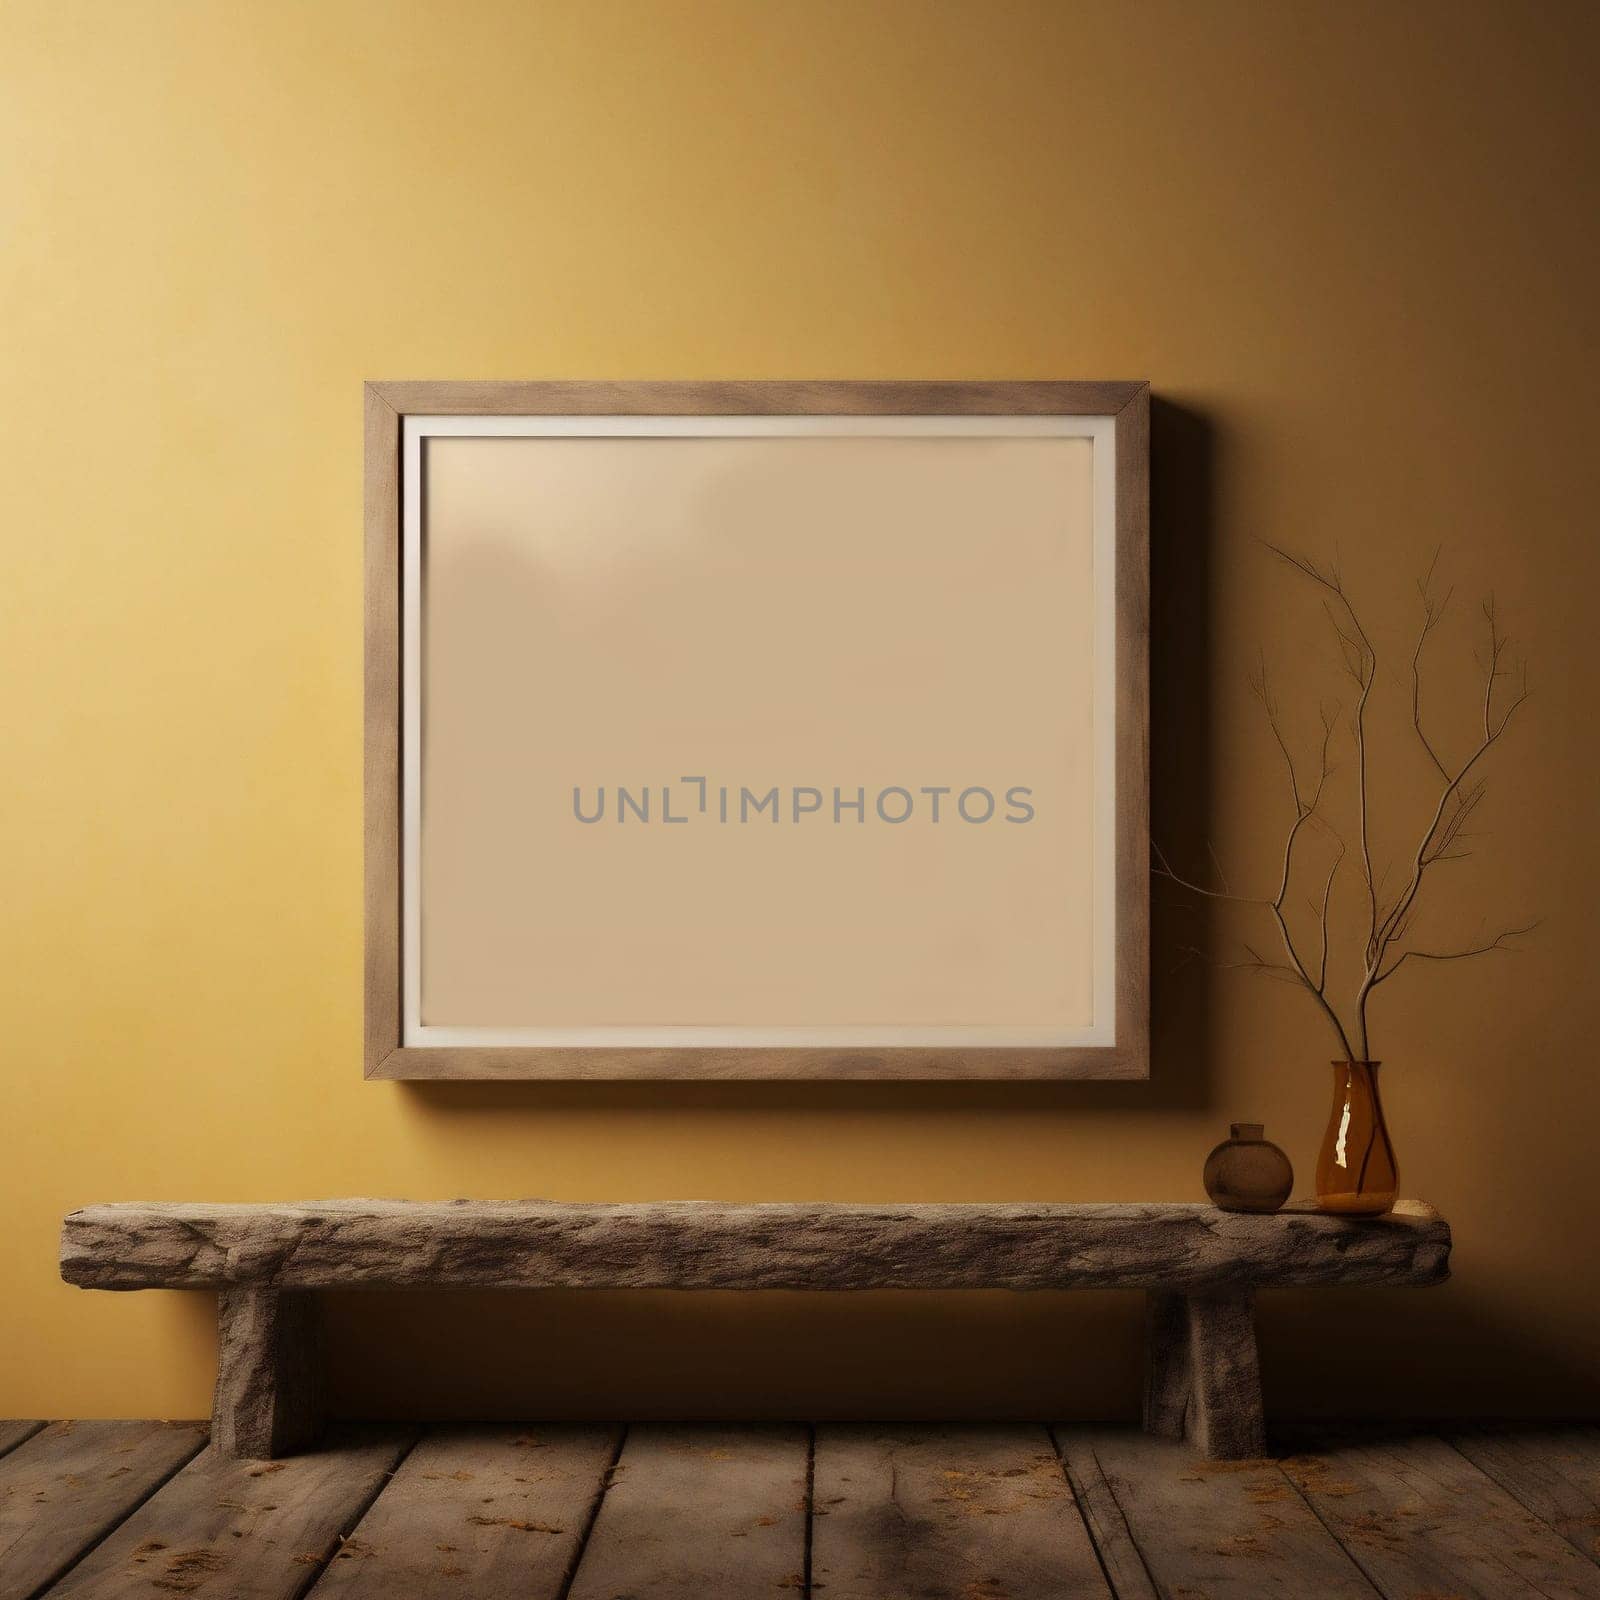 Poster Frame Design Ttemplate for Exhibition or Advertising. Picture Frame Mock Up on Brick Wall. Mockup Poster Frame with Ethnic Decor Close up in Loft Interior. Boho Beige Livingroom with Twigs in a Vase and Picture Frame Background.